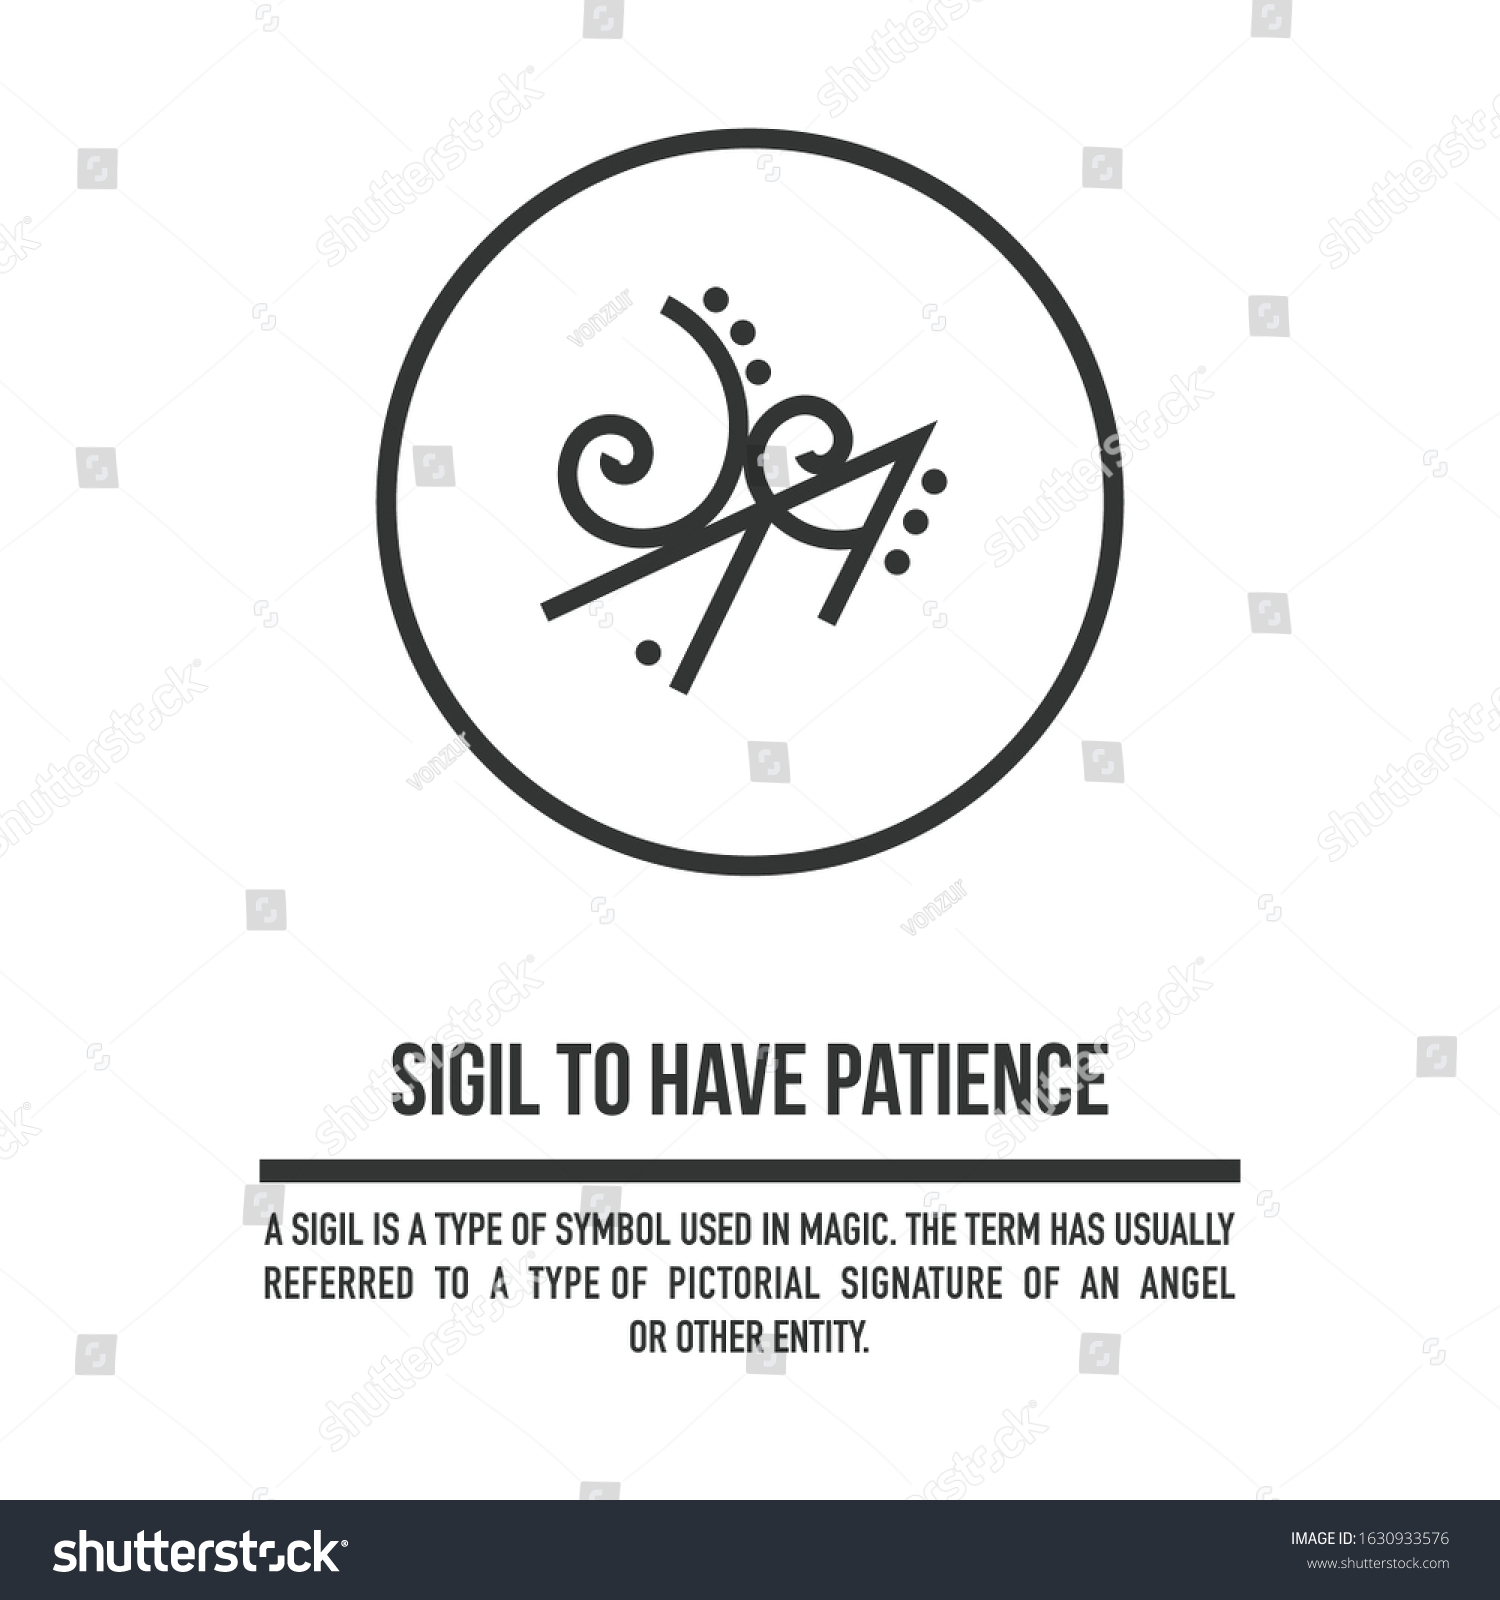 stock-vector-sigil-to-have-a-patience-a-stylized-image-of-a-magic-symbol-can-be-used-in-graphic-design-or-1630933576.jpg